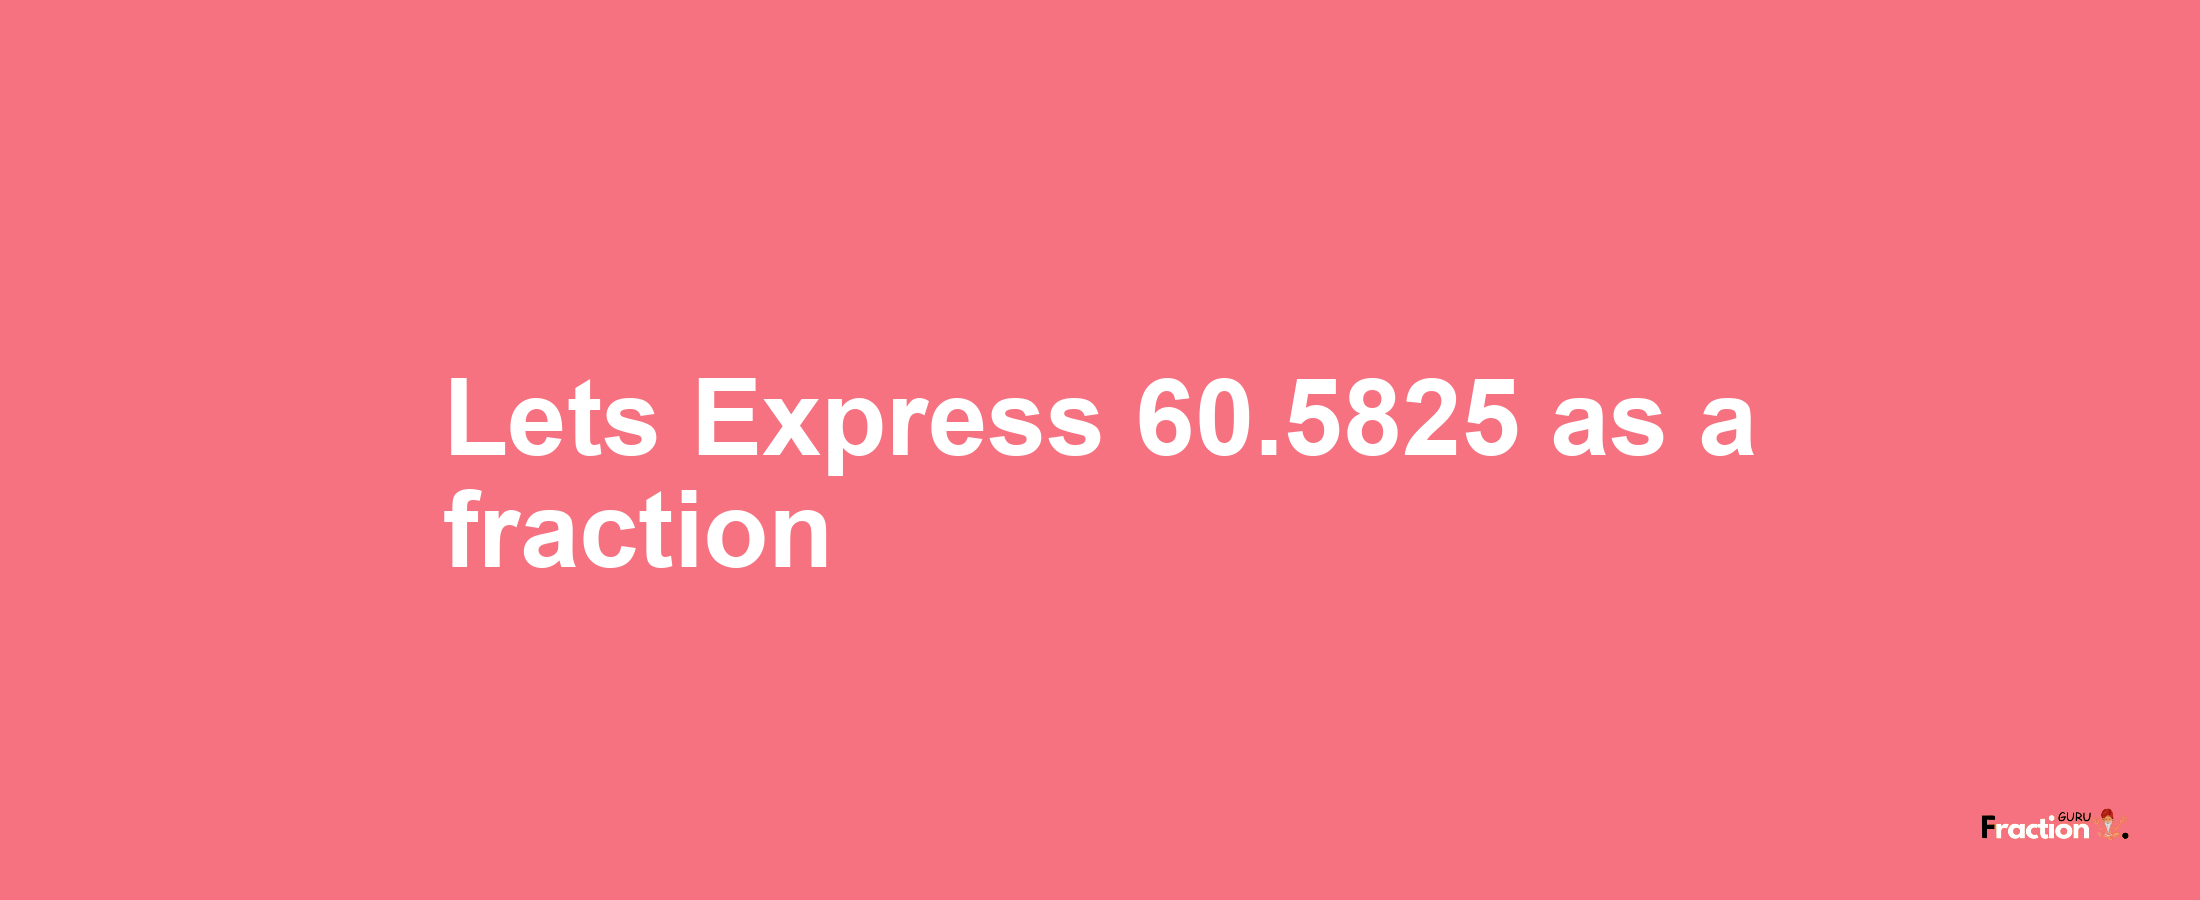 Lets Express 60.5825 as afraction